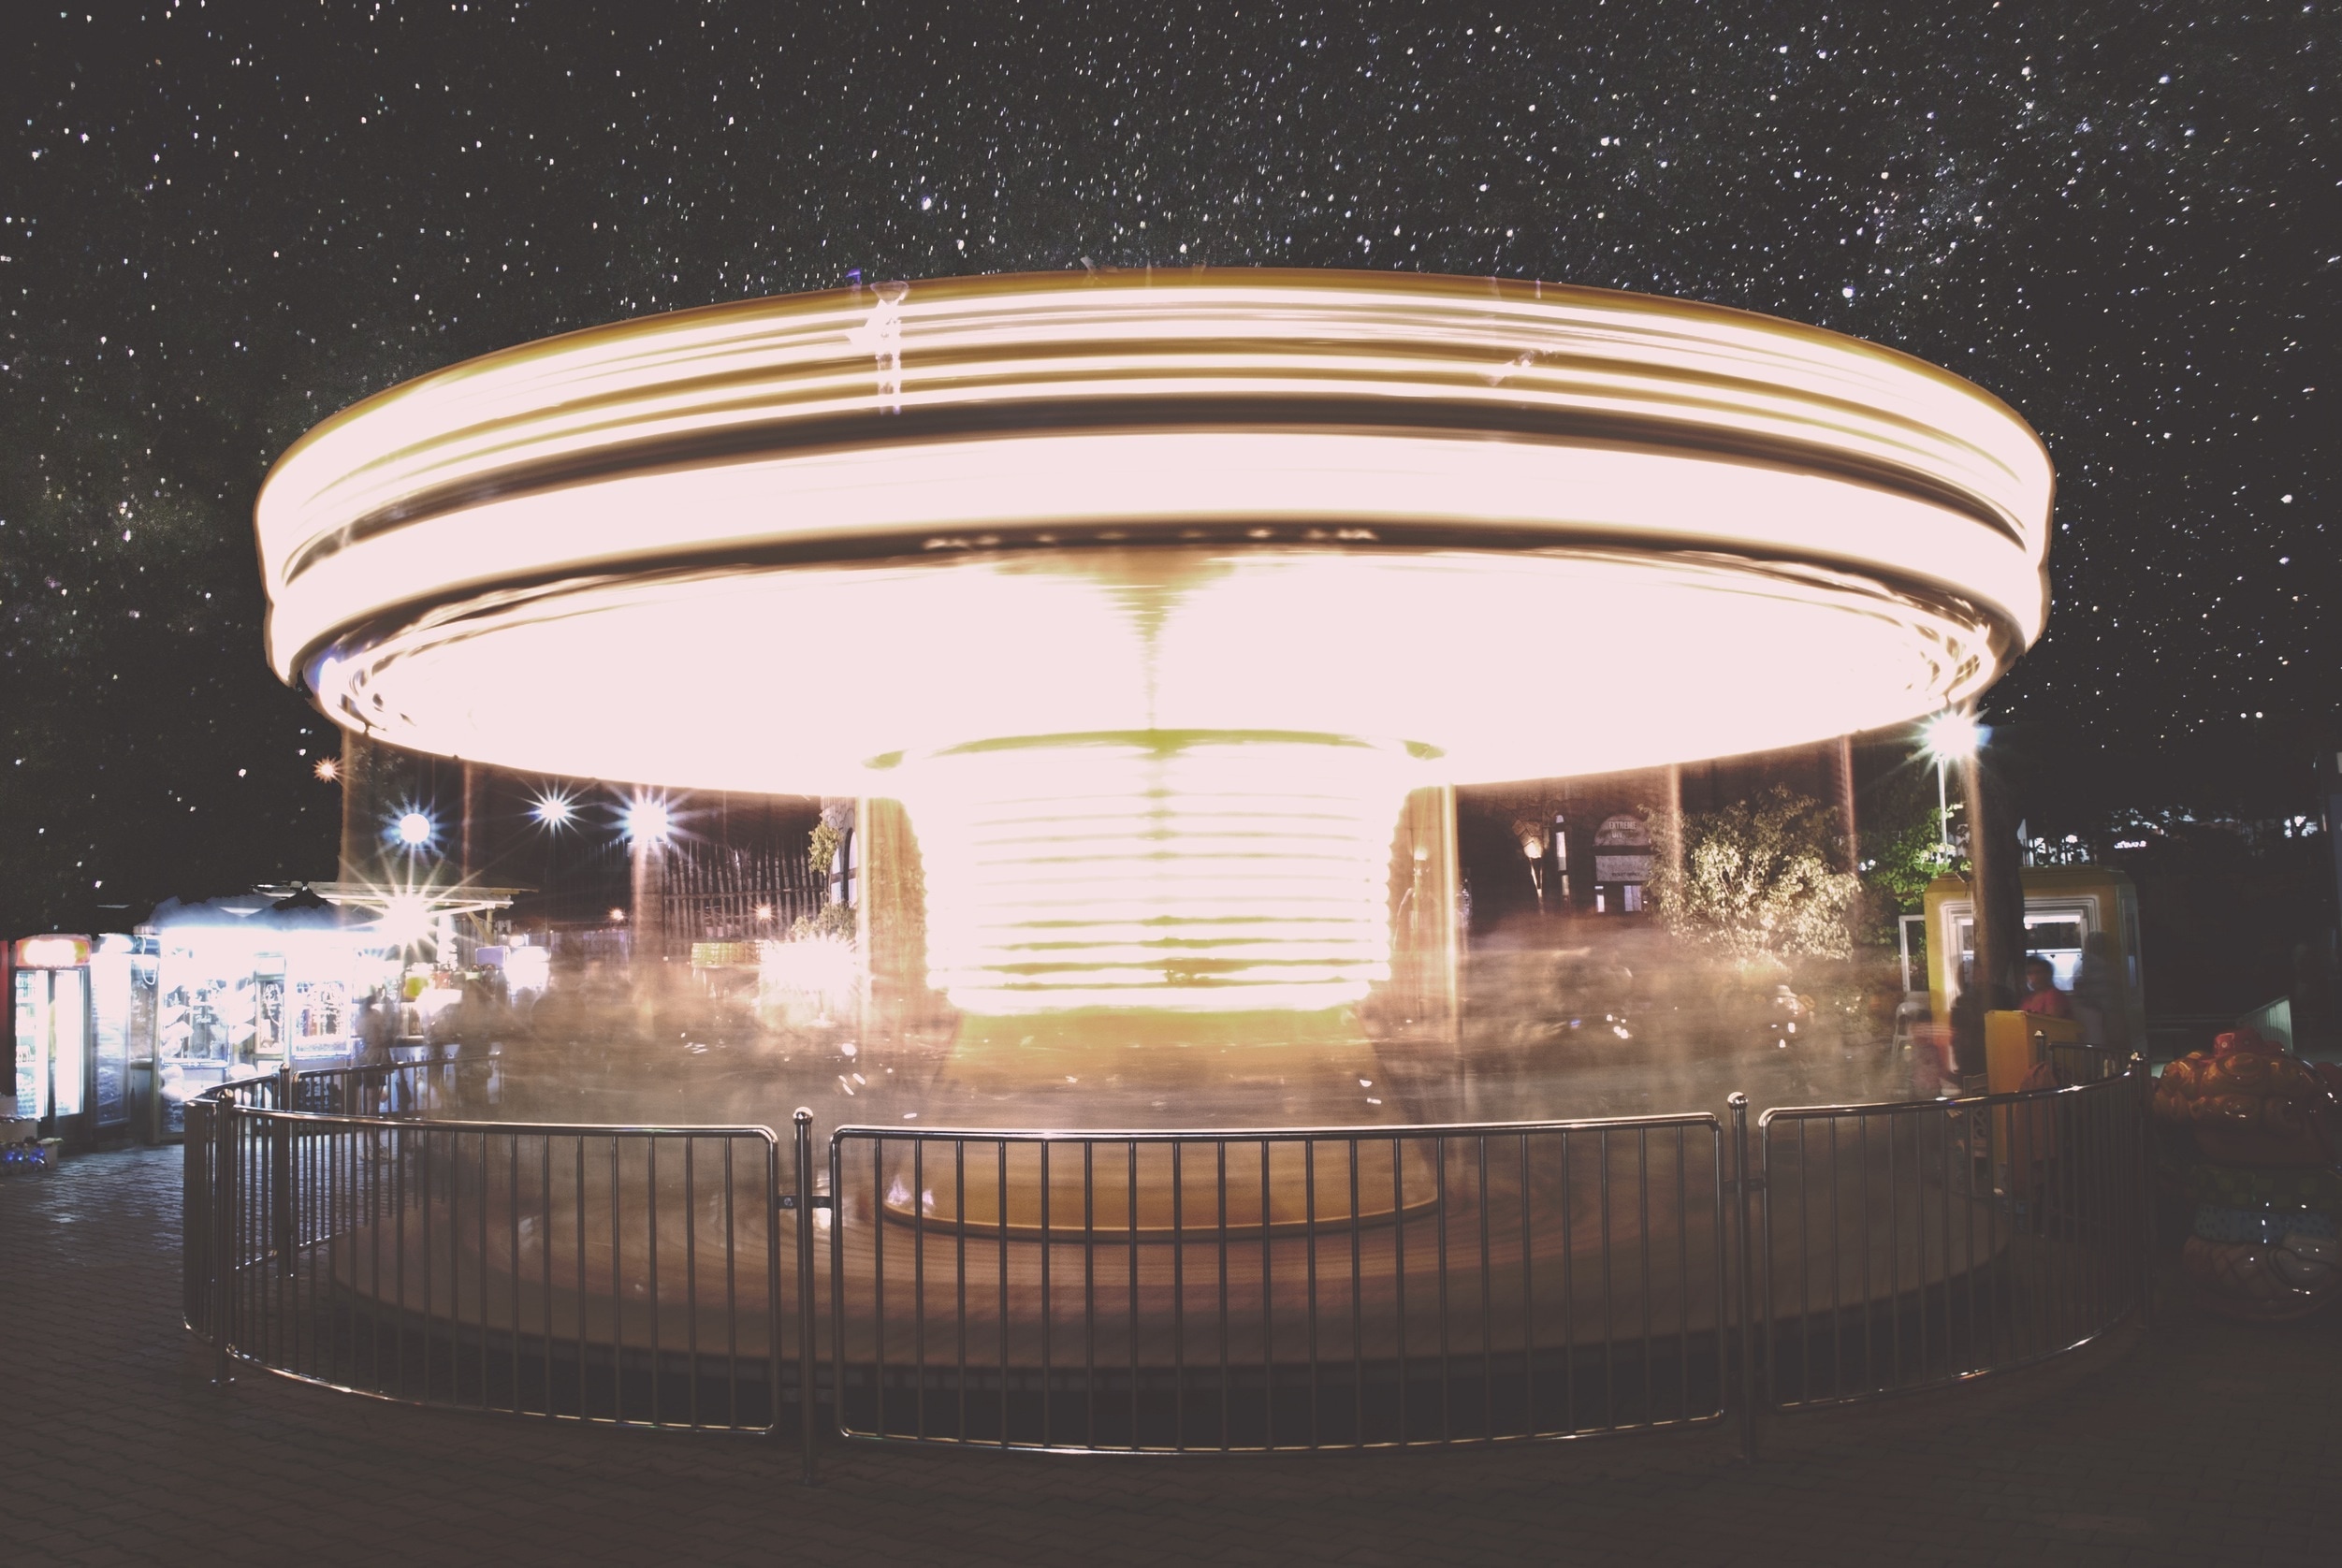 time lapse photography of carousel during night time